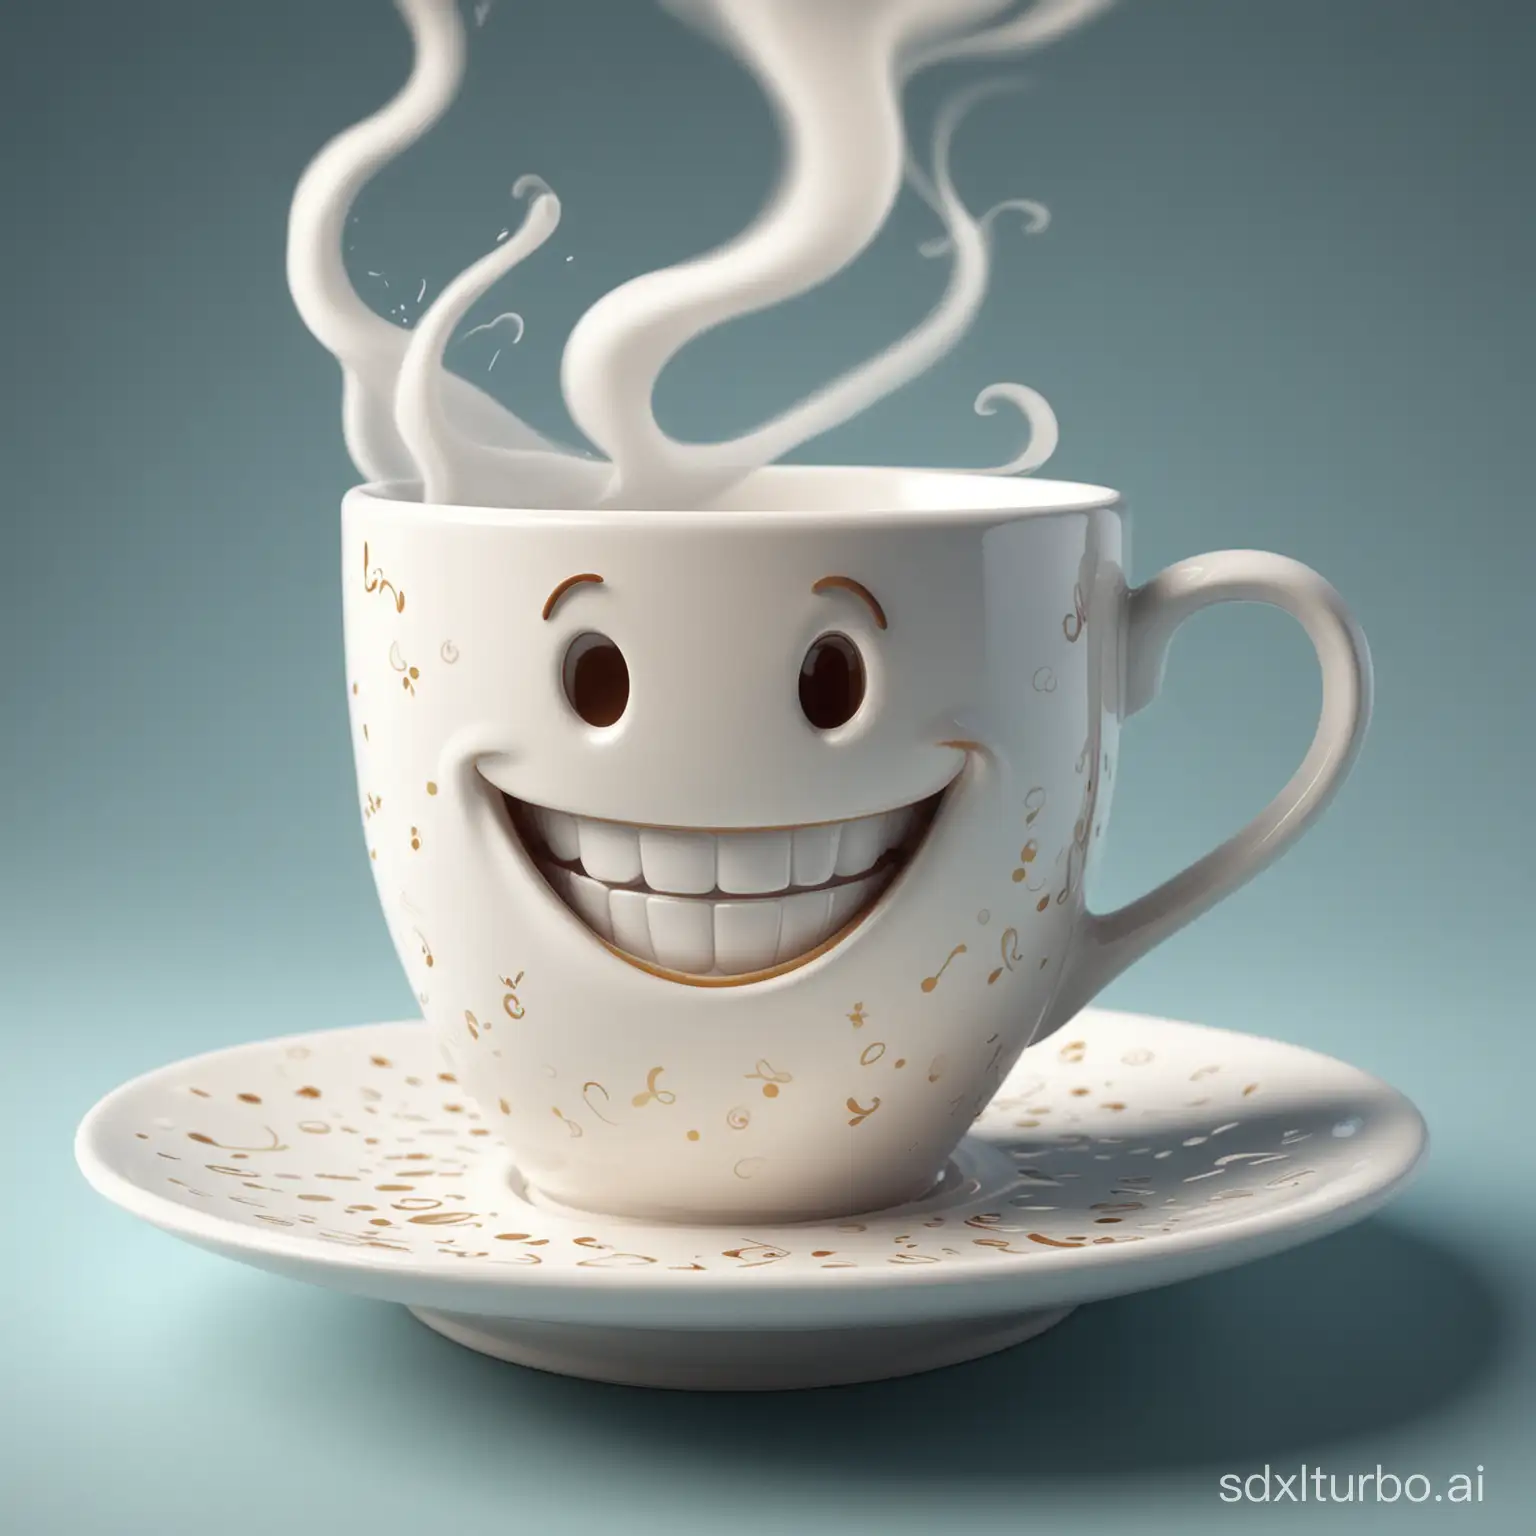 An enchanting, 3D illustration of a cheerful and whimsical coffee cup, personified with a wide, happy smile, revealing its gleaming white teeth. The cup is with white steam and  sits atop a playful saucer with a swirling pattern.